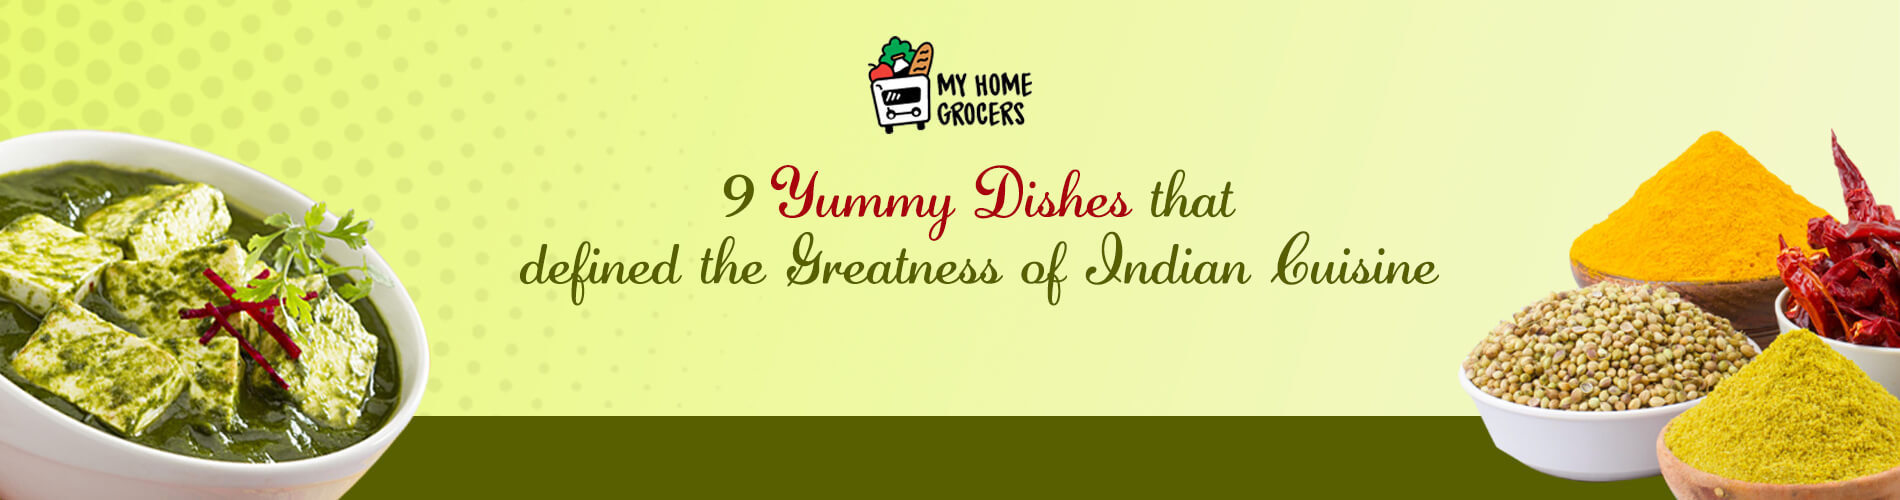 9 Yummy Dishes that defined the Greatness of Indian Cuisine